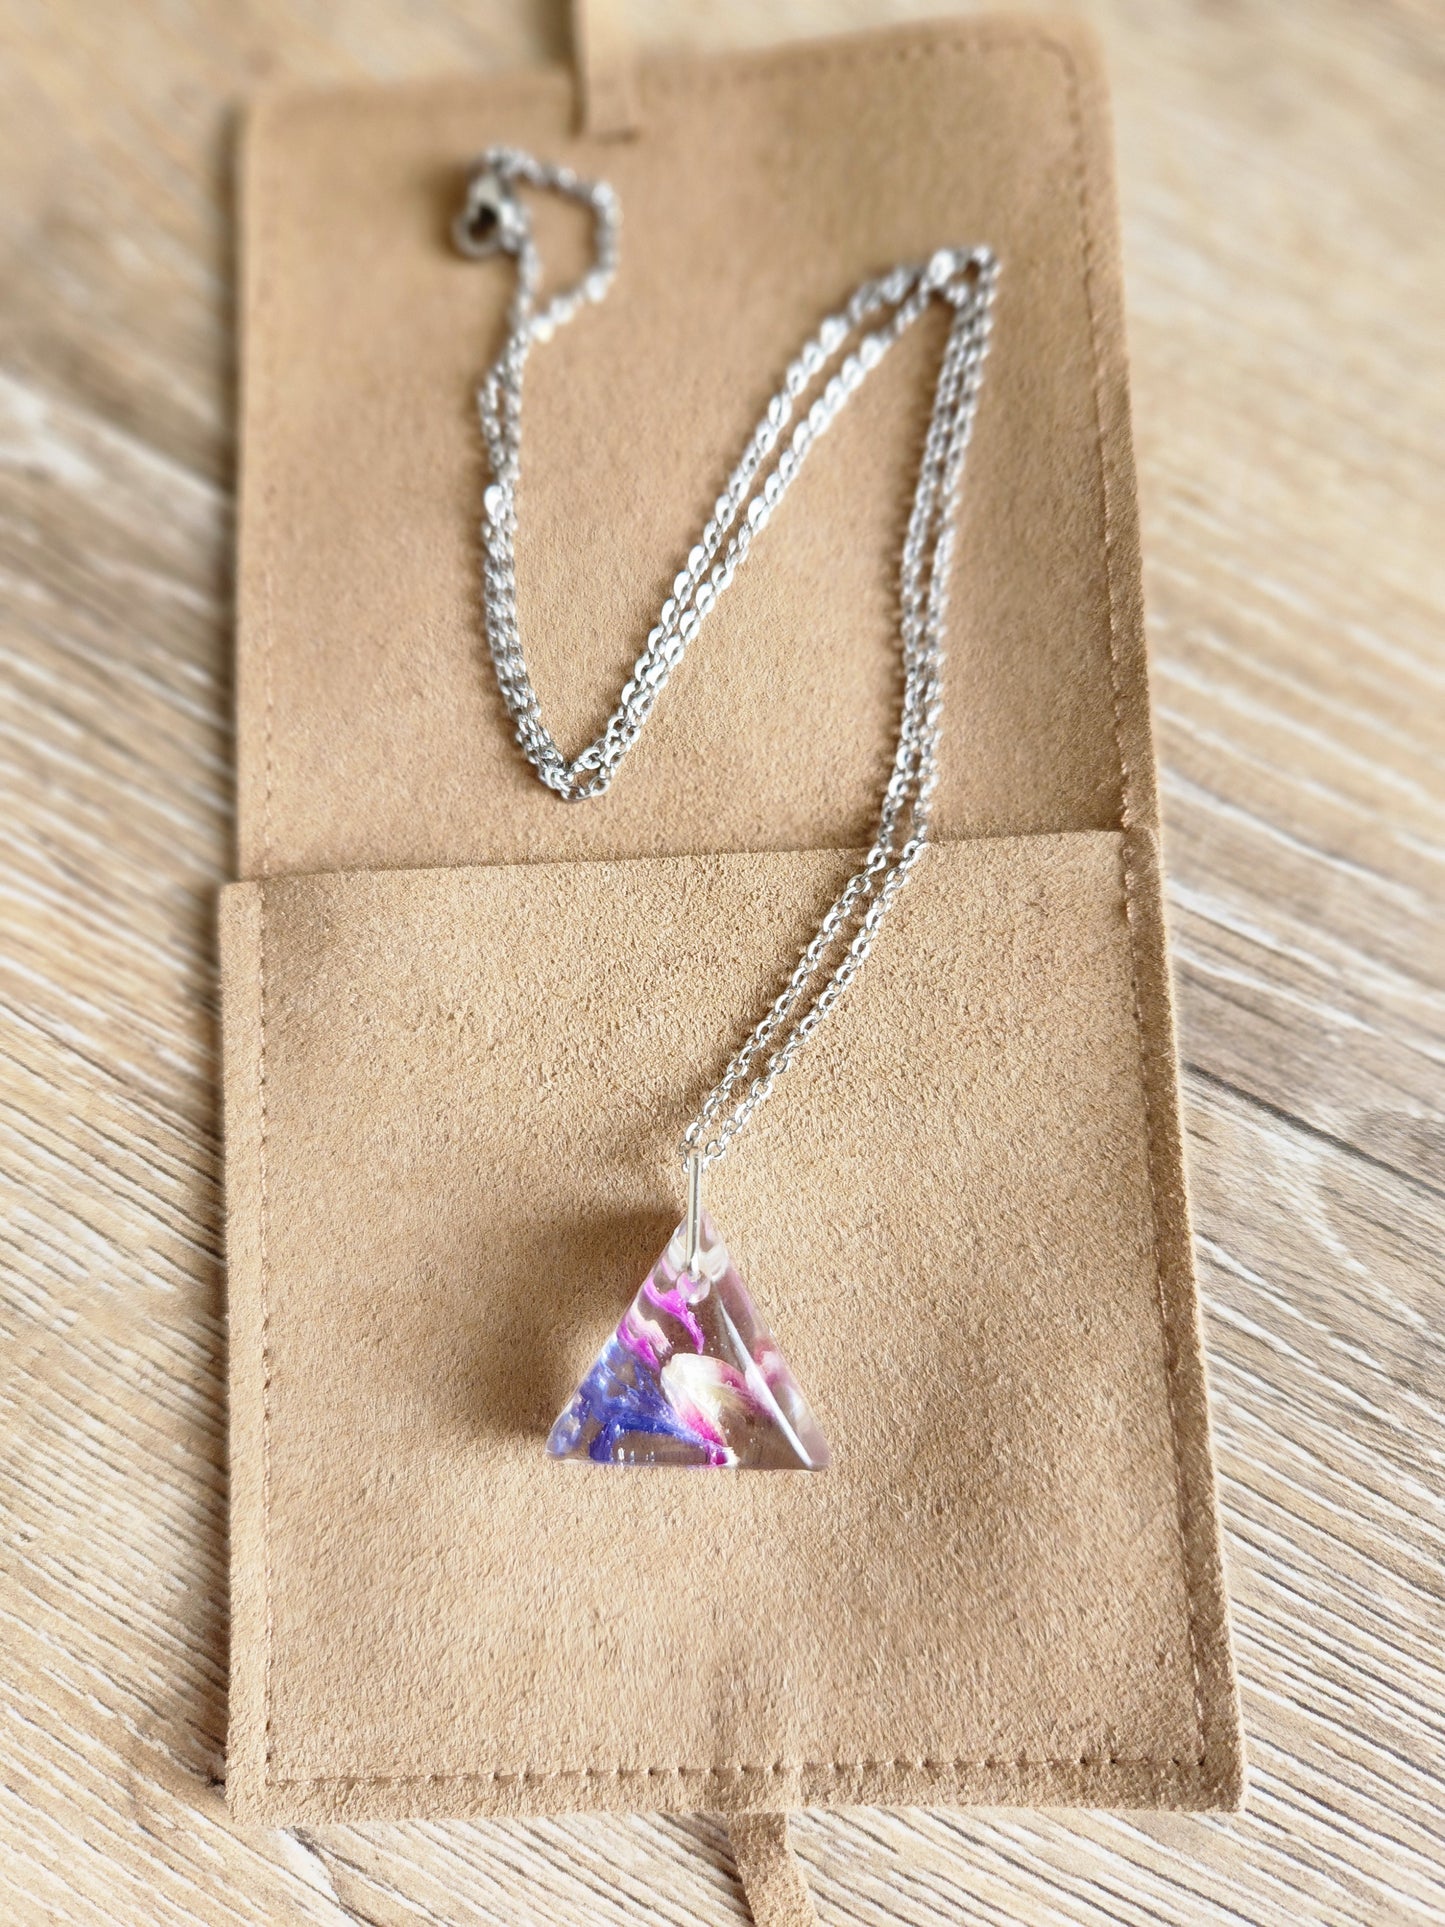 Pyramid Necklace - pink, purple and blue